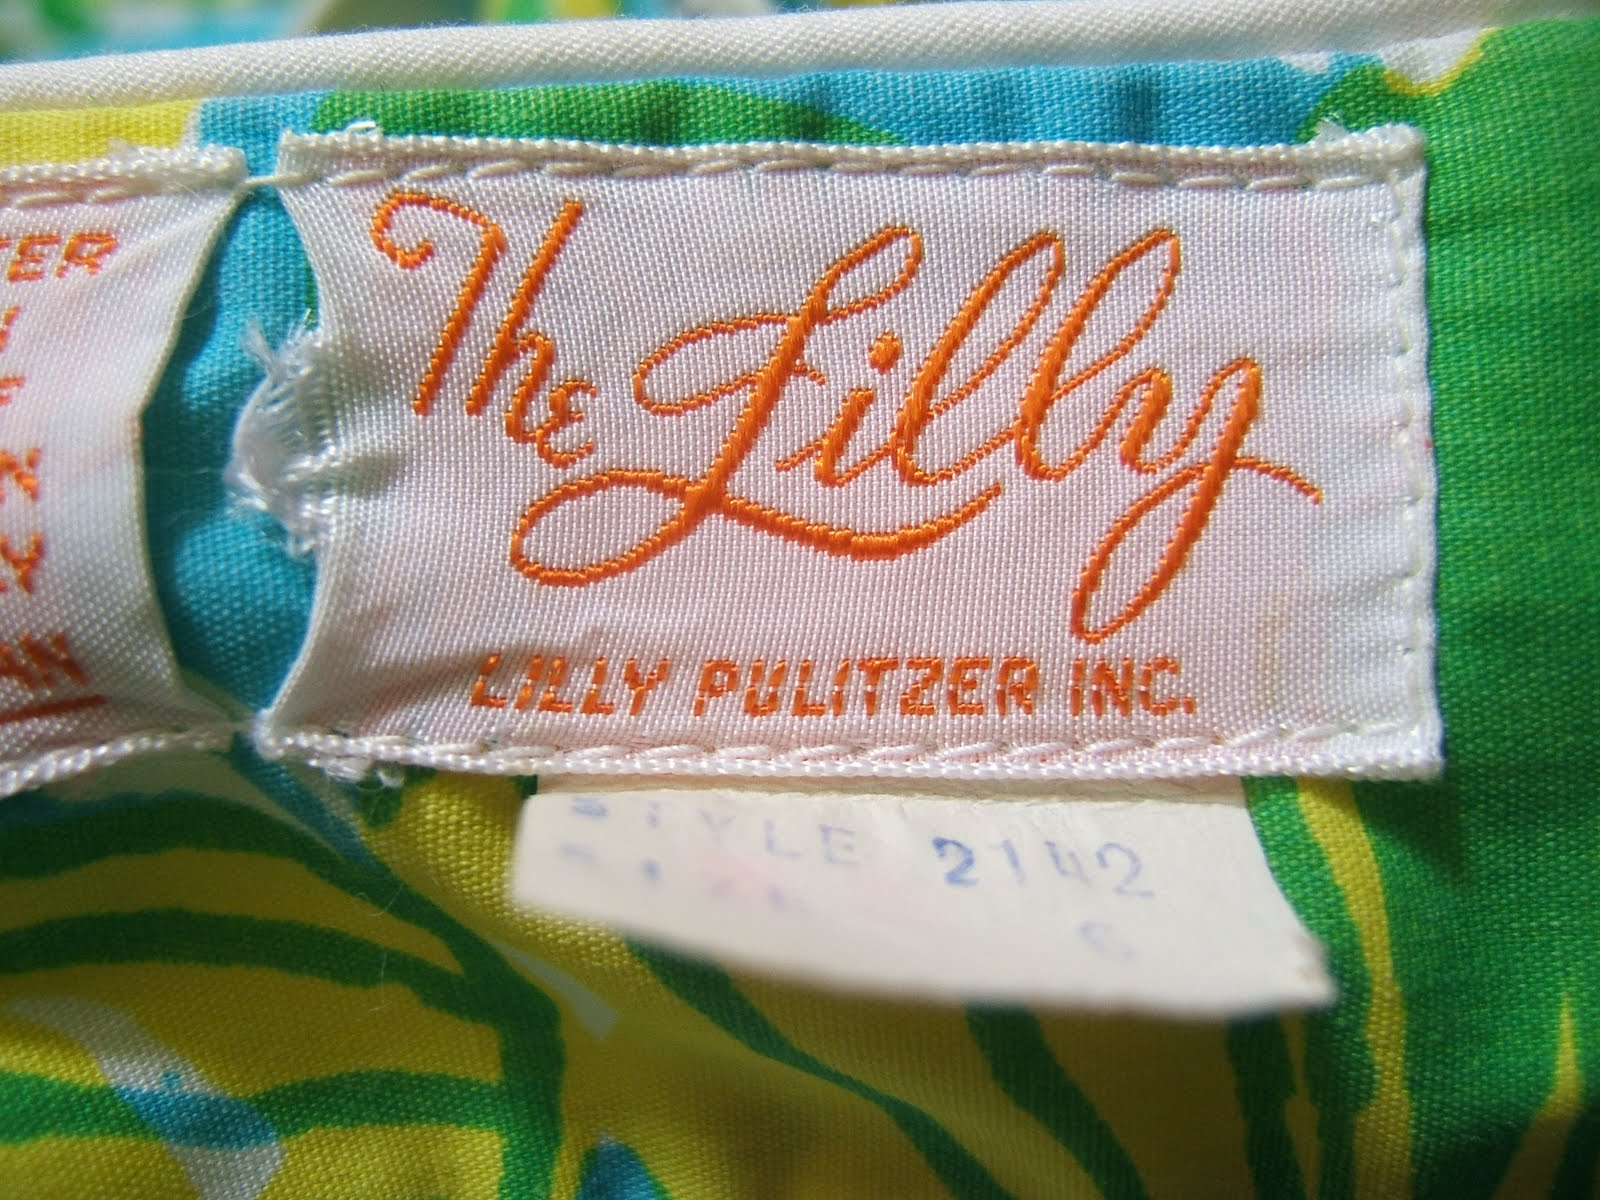 Square With Flair: LILLY PULITZER, Fifty Years of Palm Beach Preppy Prints